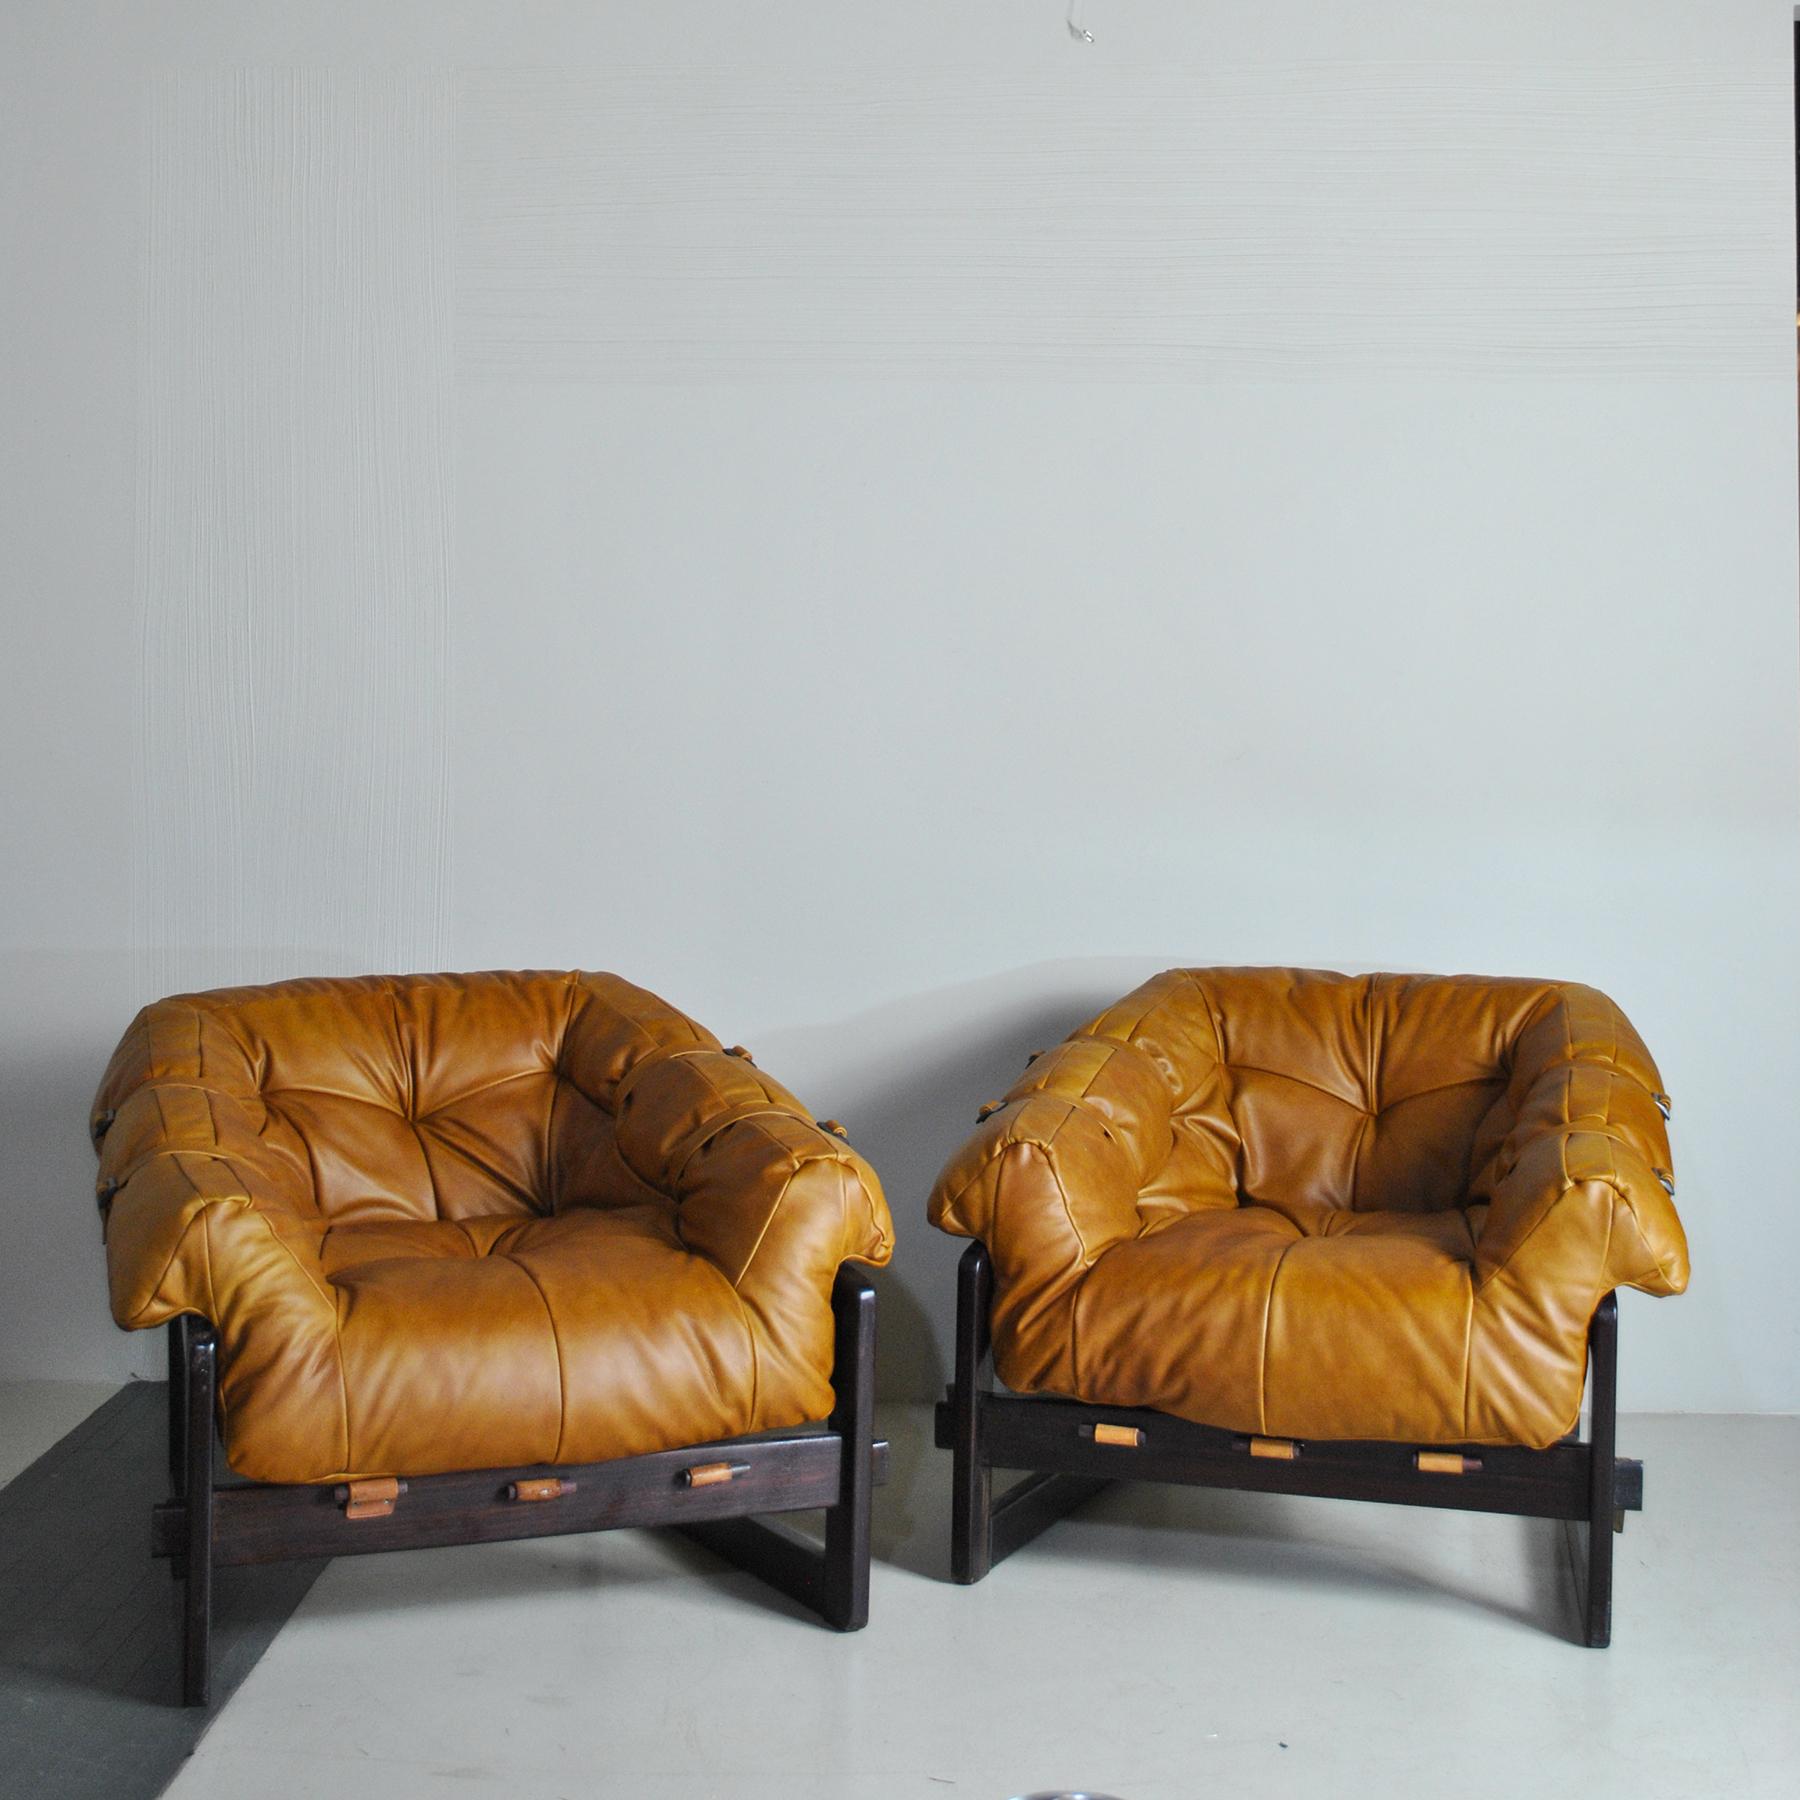 Percival Lafer Pair of Midcentury Brazilian Lounge Chair, 1960s 1